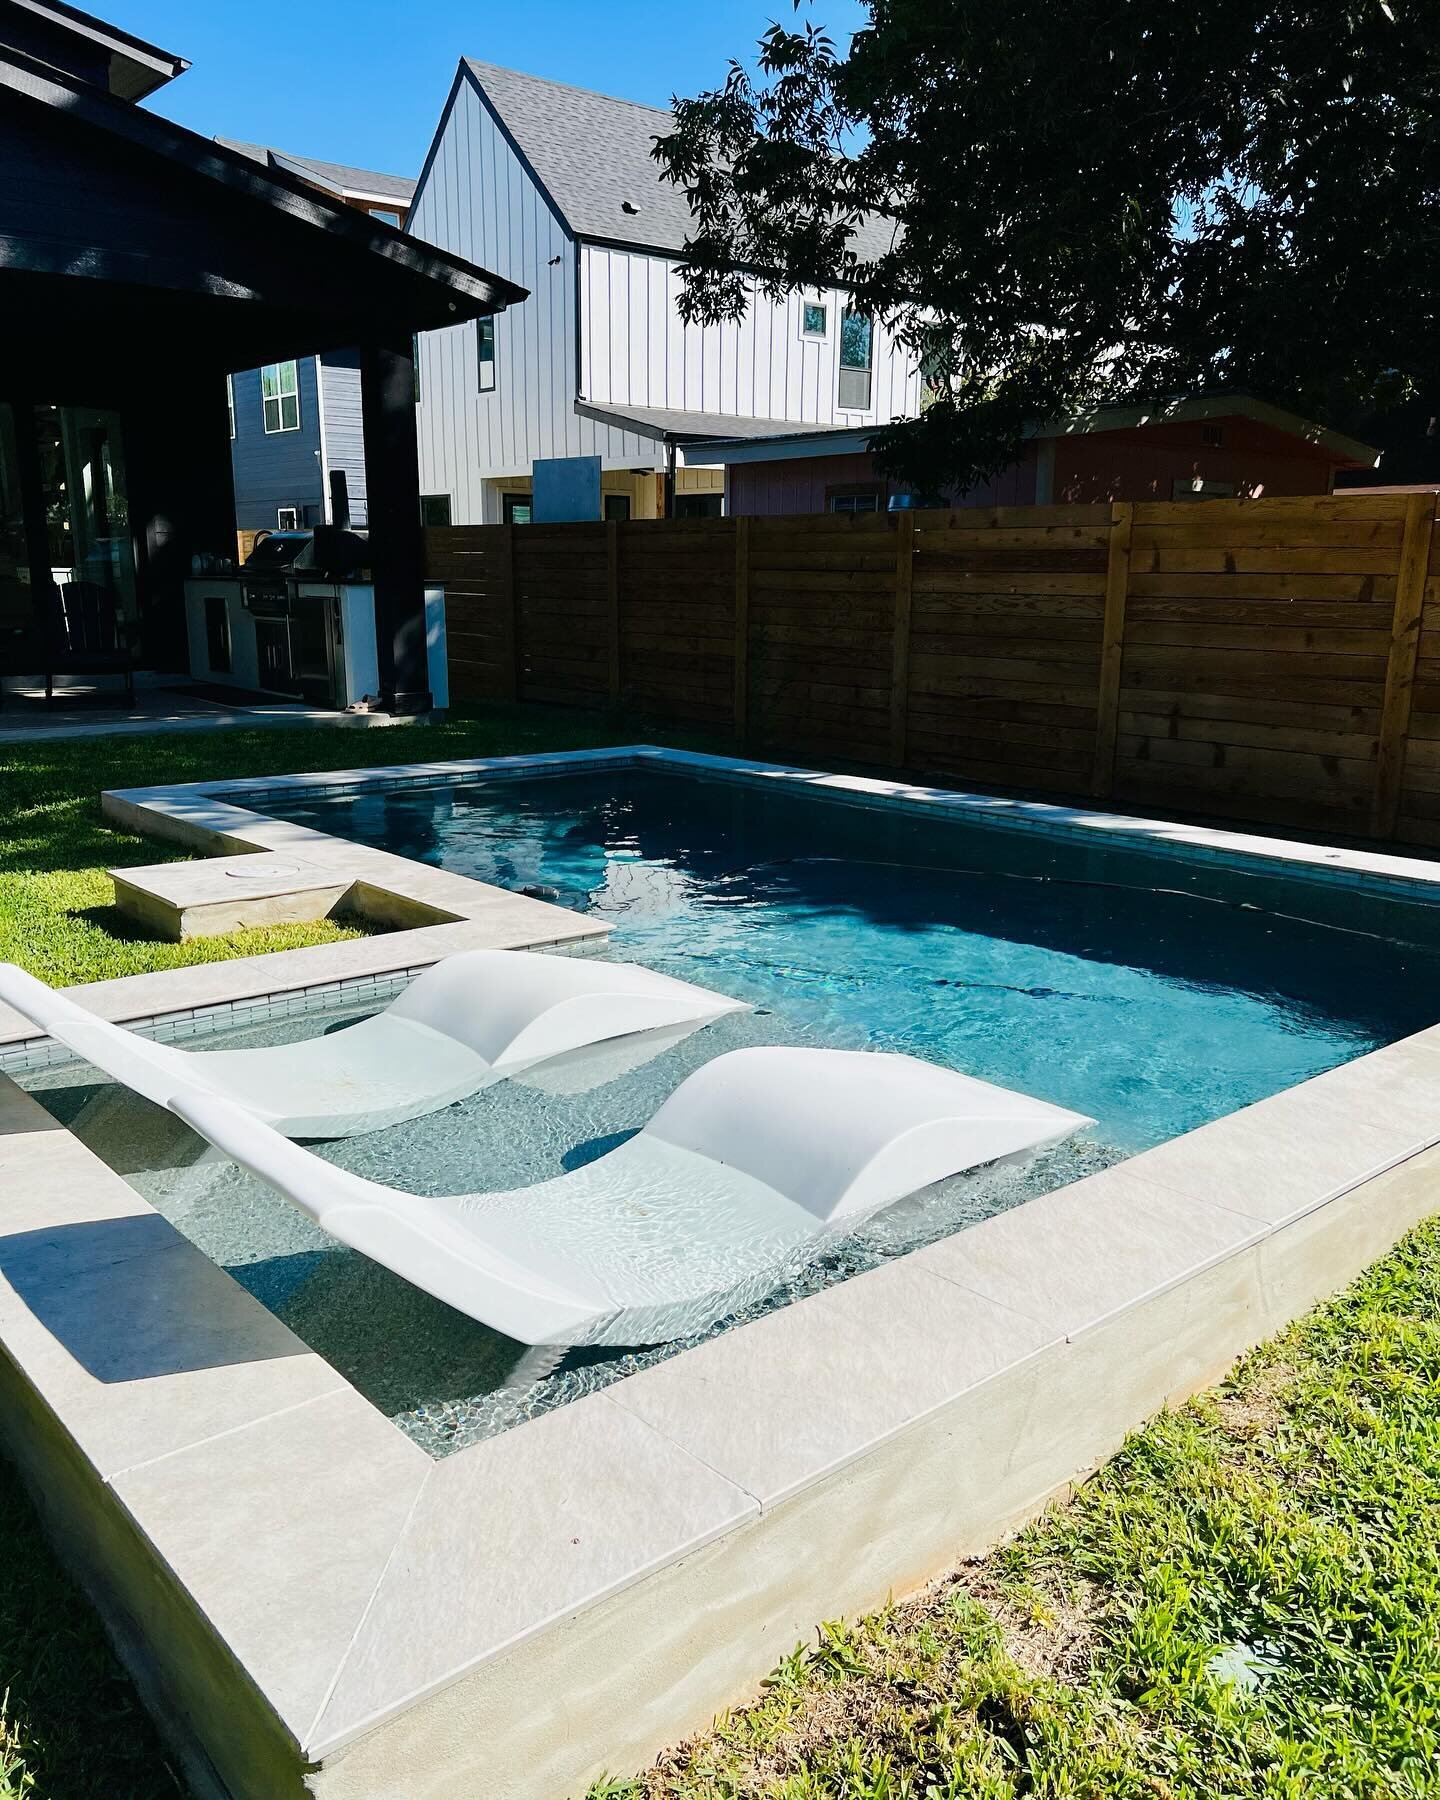 Swim season is ending but pool building is about to heat up! Right now is the perfect time to get started on a design to be ready for next year. 

Call or email today to start the conversation.